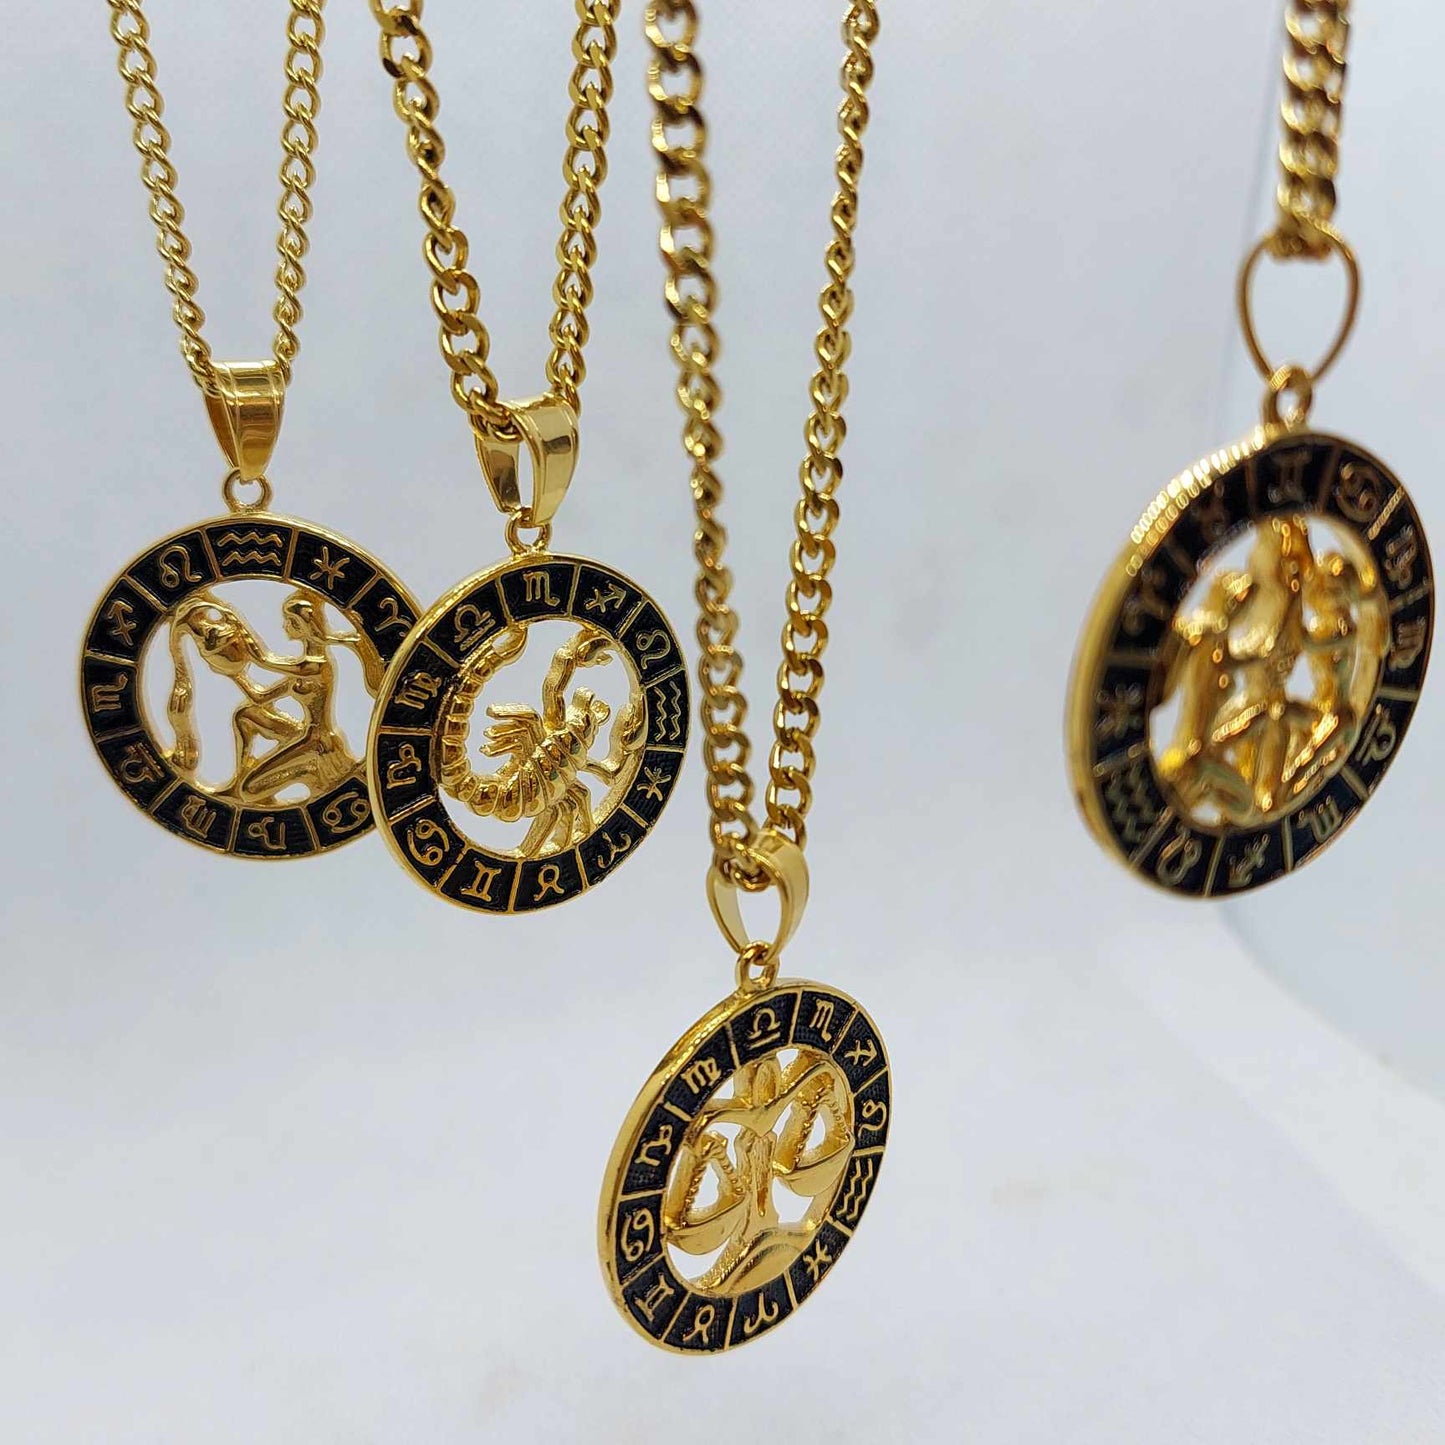 Libra Star Sign  Pendant with Gold Plated Stainless Steel Chain Necklace